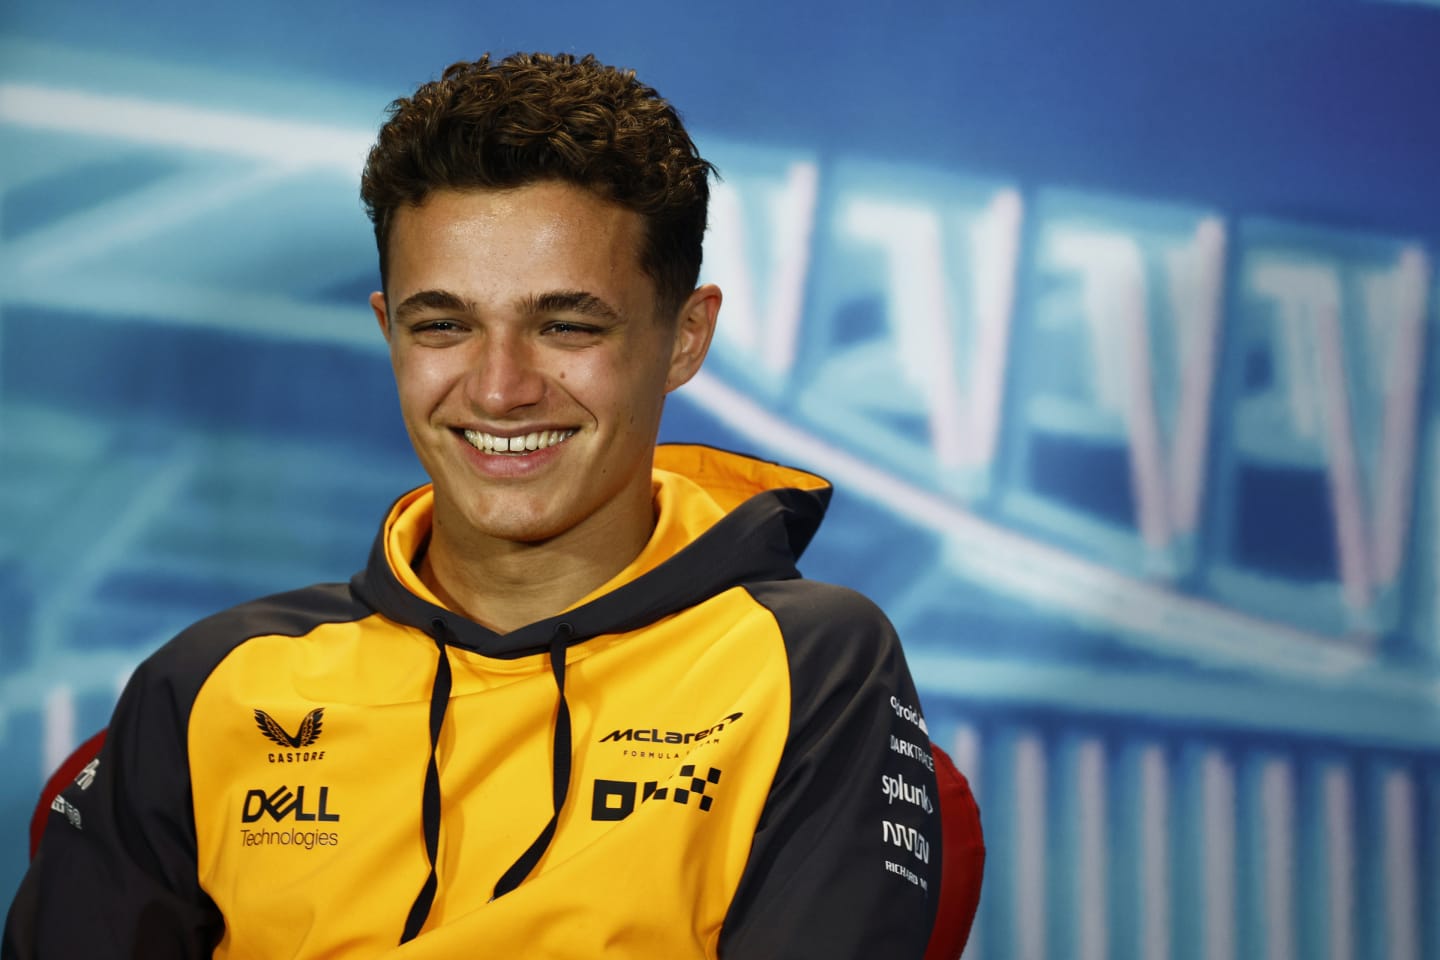 MIAMI, FLORIDA - MAY 06: Lando Norris of Great Britain and McLaren talks in the Drivers Press Conference prior to practice ahead of the F1 Grand Prix of Miami at the Miami International Autodrome on May 06, 2022 in Miami, Florida. (Photo by Jared C. Tilton/Getty Images)